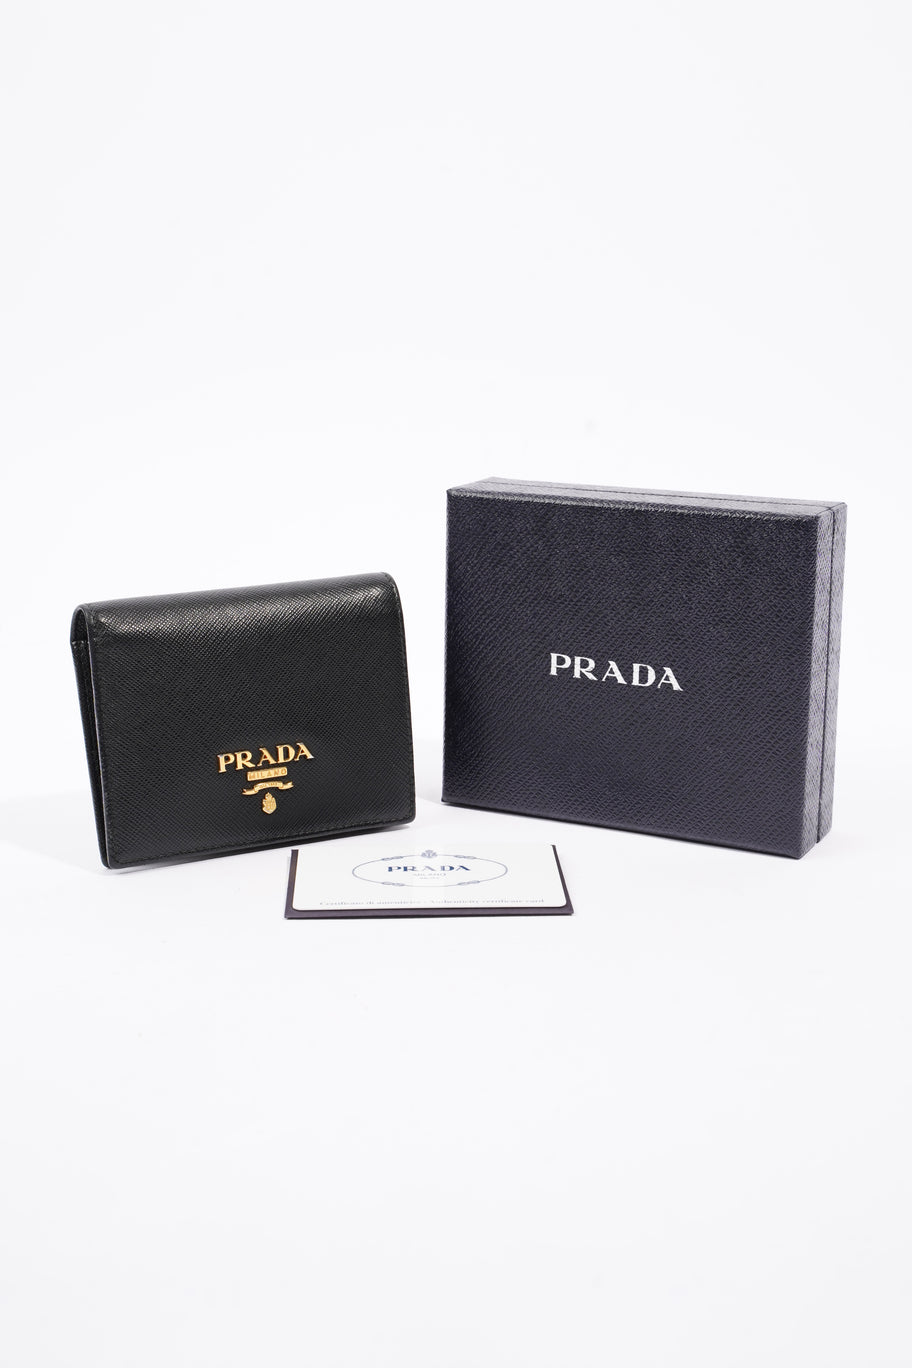 Compact Wallet Black Saffiano Leather Image 6